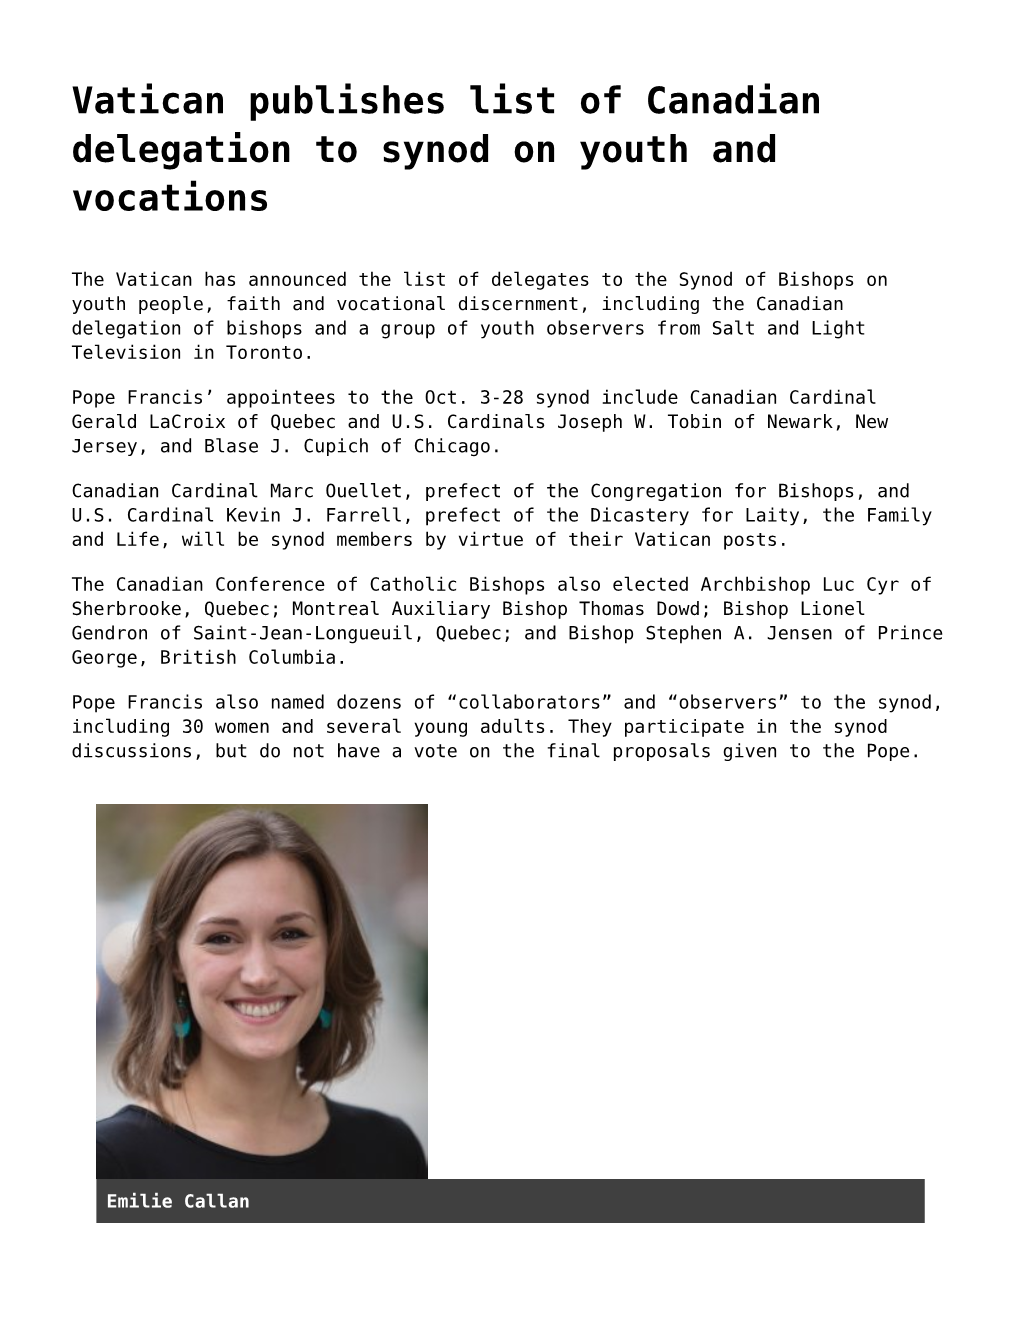 Vatican Publishes List of Canadian Delegation to Synod on Youth and Vocations